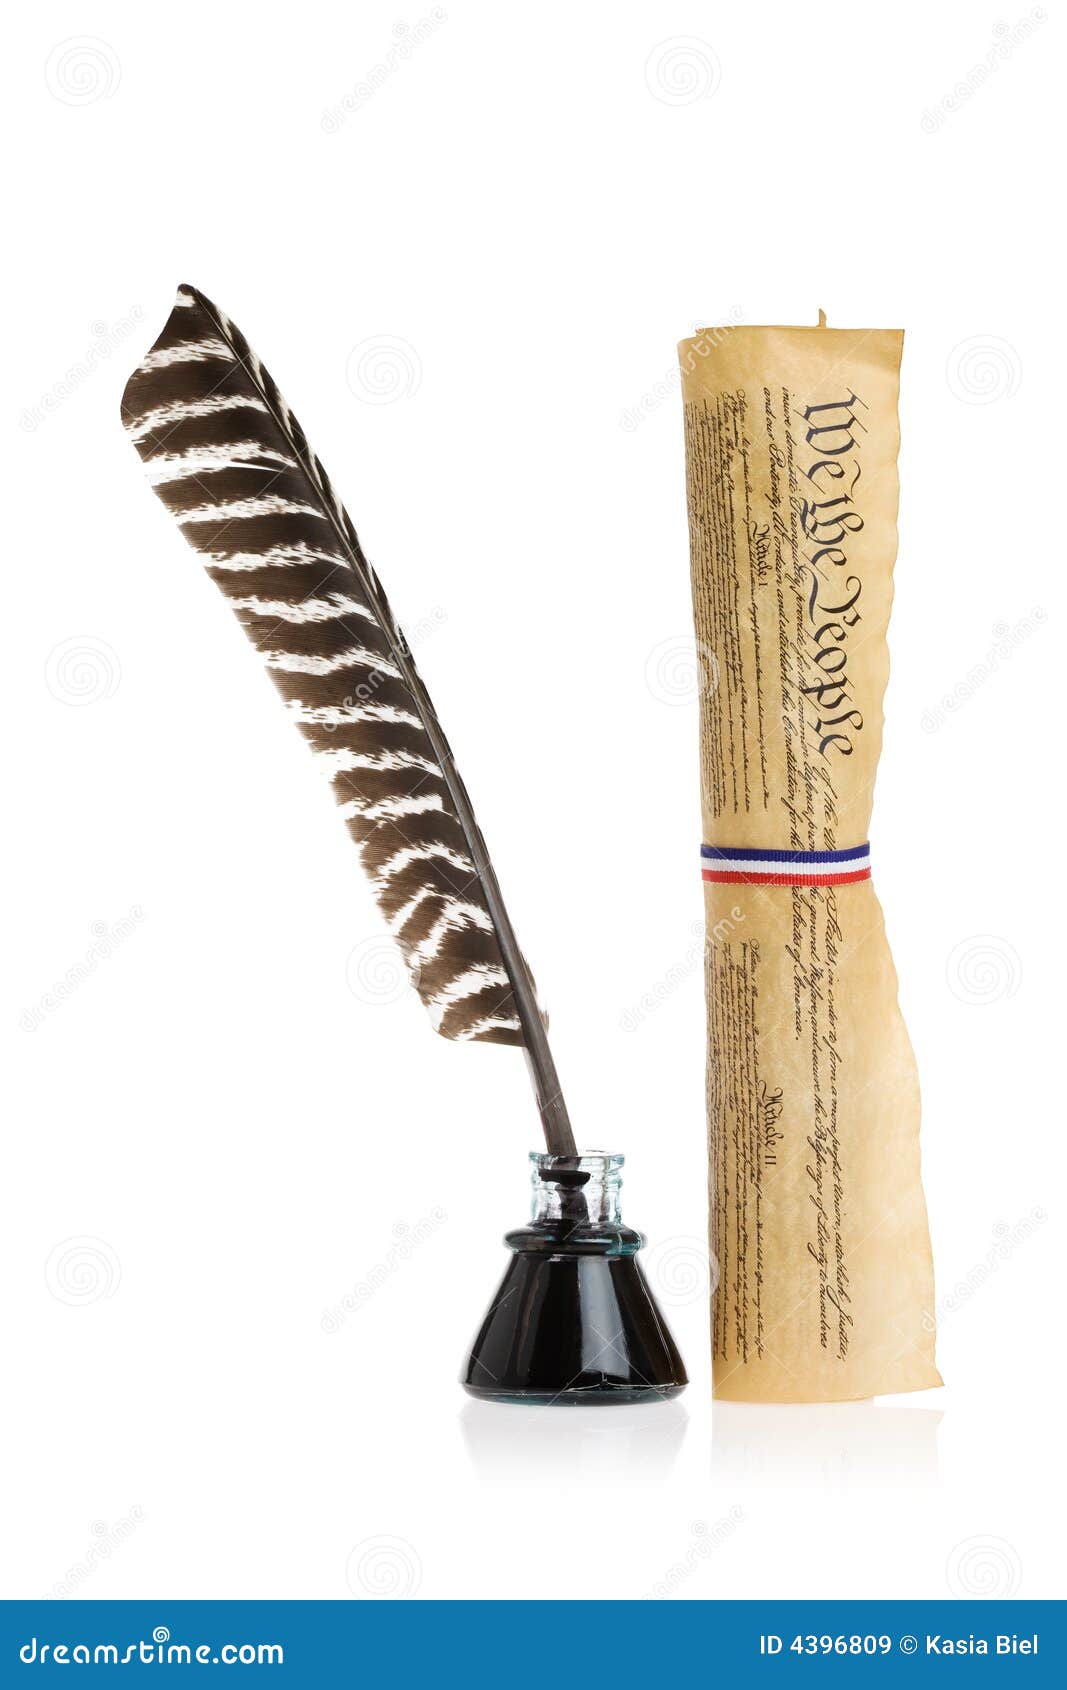 quill and united states constitution